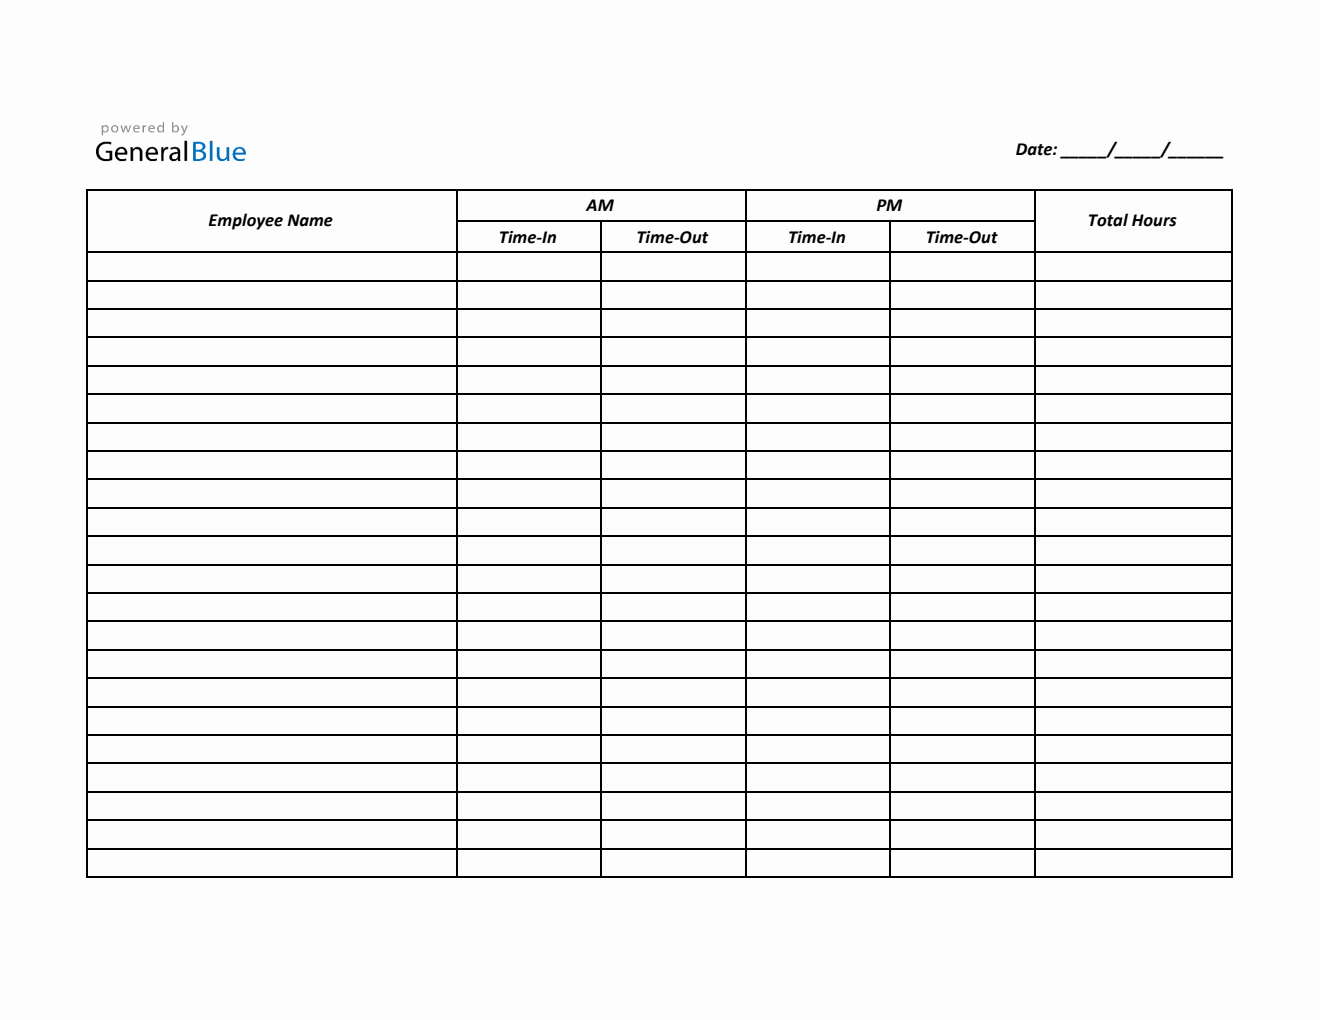 Printable Time-in and Time-Out Timesheet (Excel, A4)